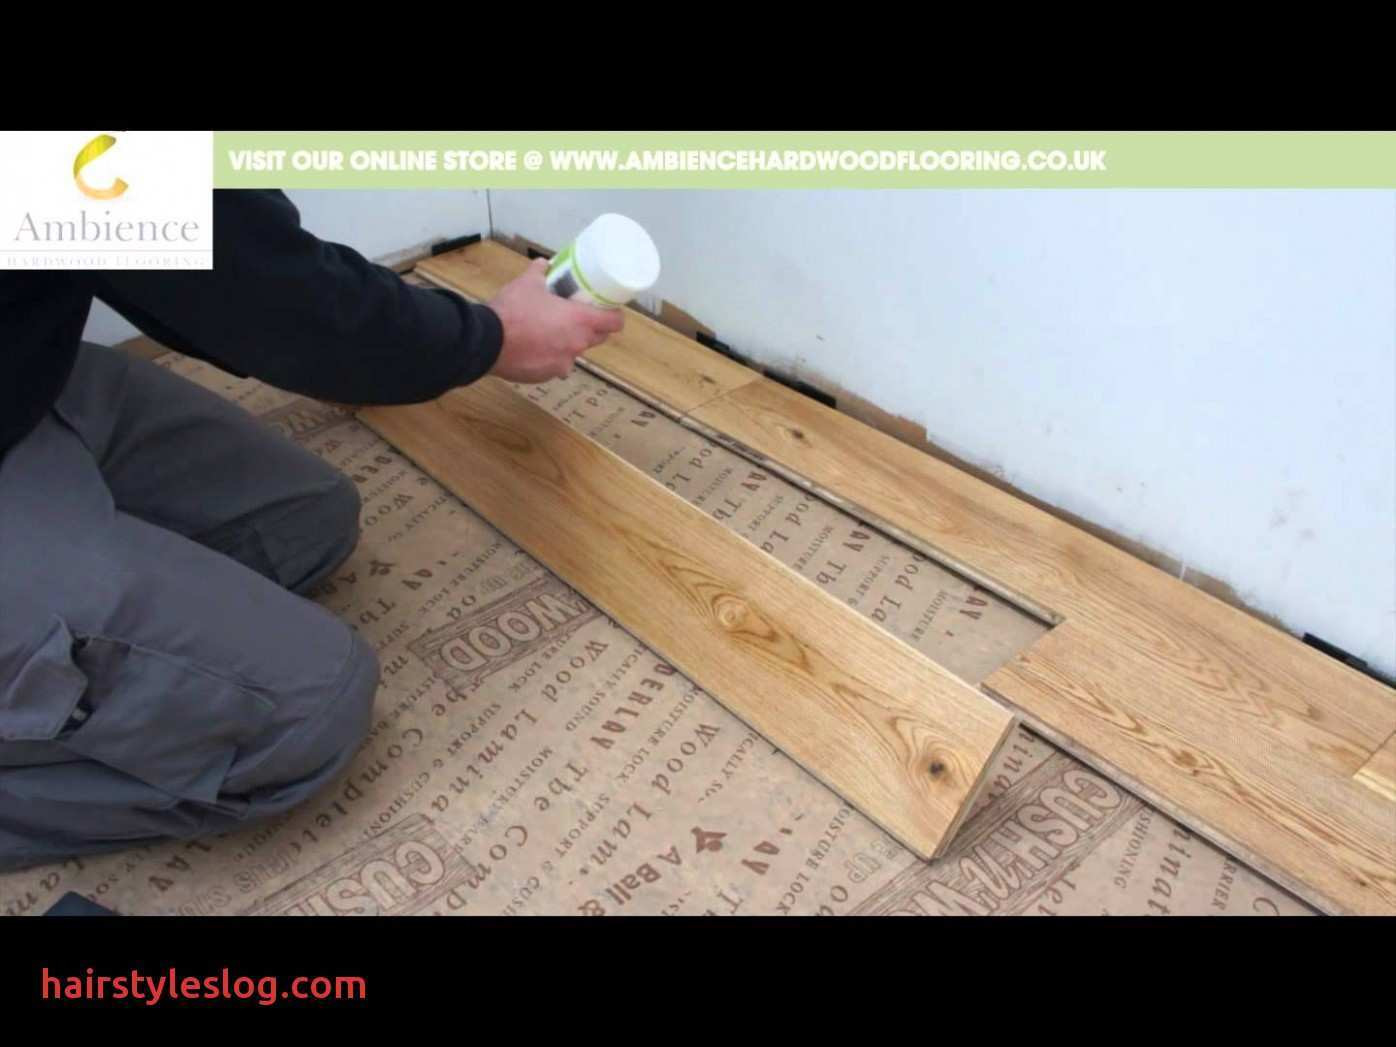 hardwood flooring warehouse near me of plan how do you install engineered hardwood floors on concrete with regarding colorful how do you install engineered hardwood floors on concrete plans how to install engineered tongue